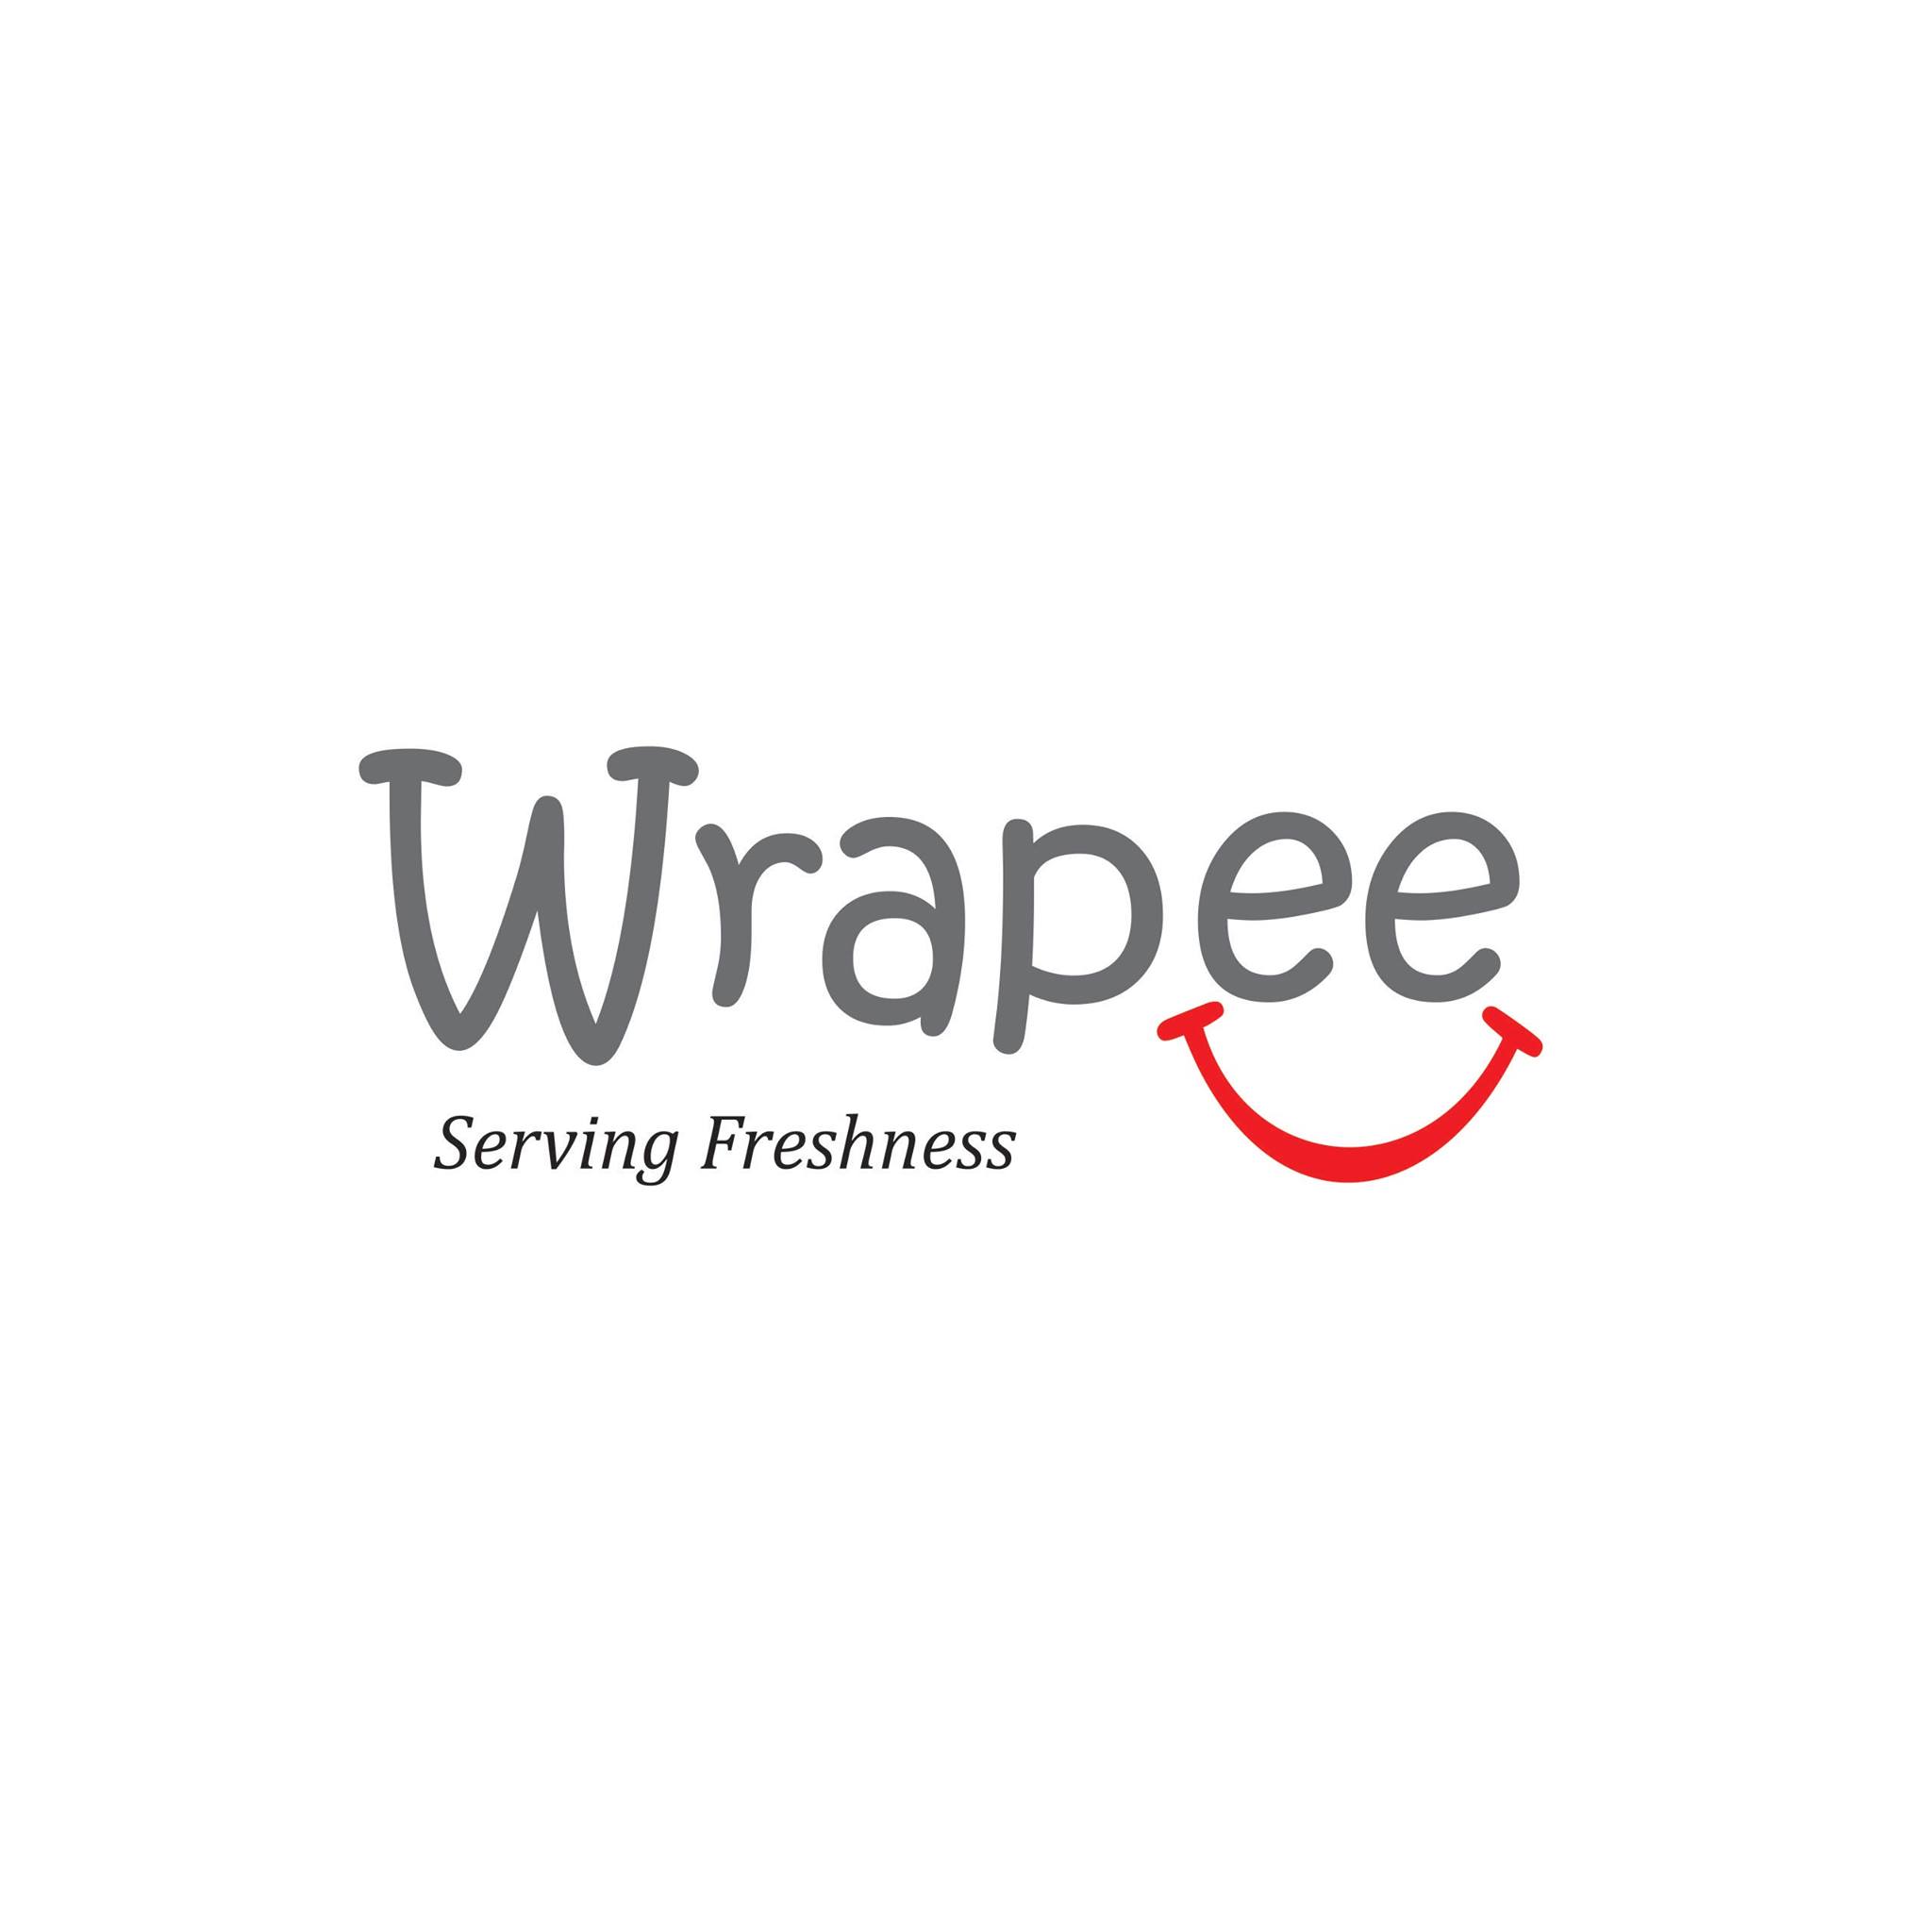  Wrapee - Food Wrapping Paper Manufacturer, Aluminium Foil Manufacturer, Baking Paper Manufacturers, Parchment Paper Manufacturers